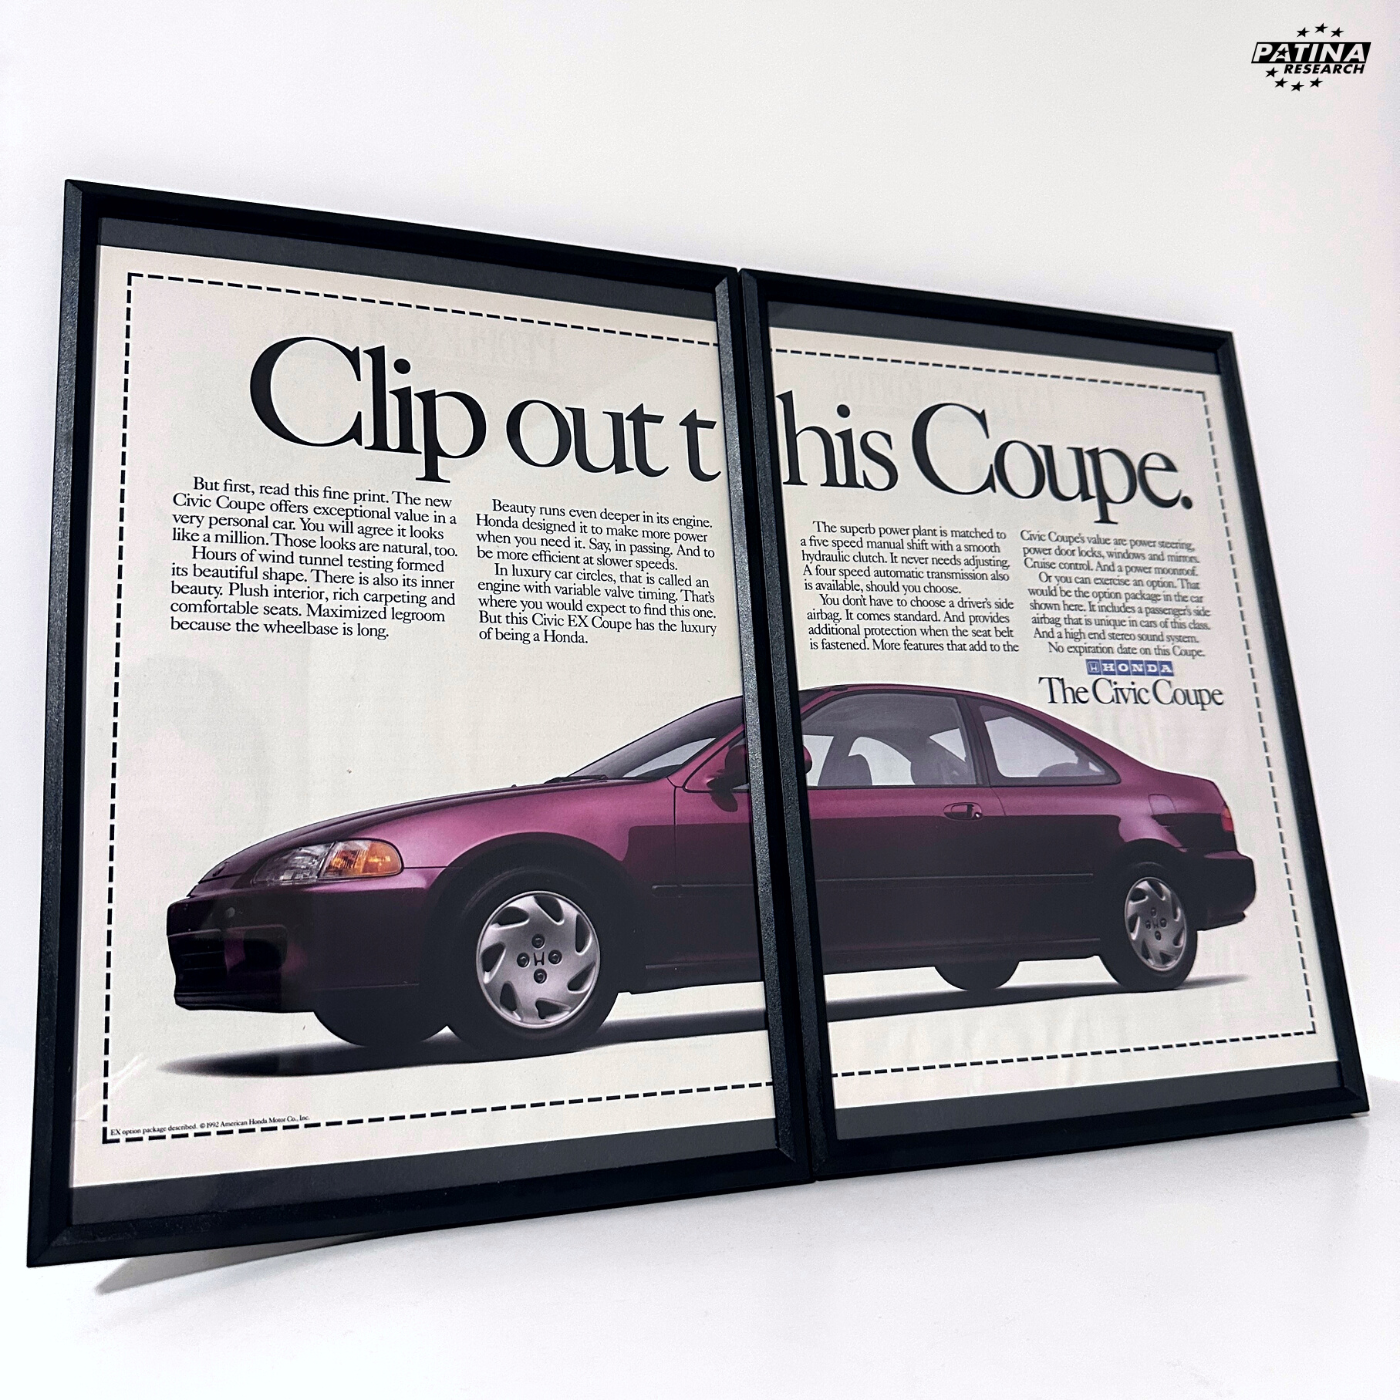 The Honda Civic Coupe. Clip out this Coupe. framed ad